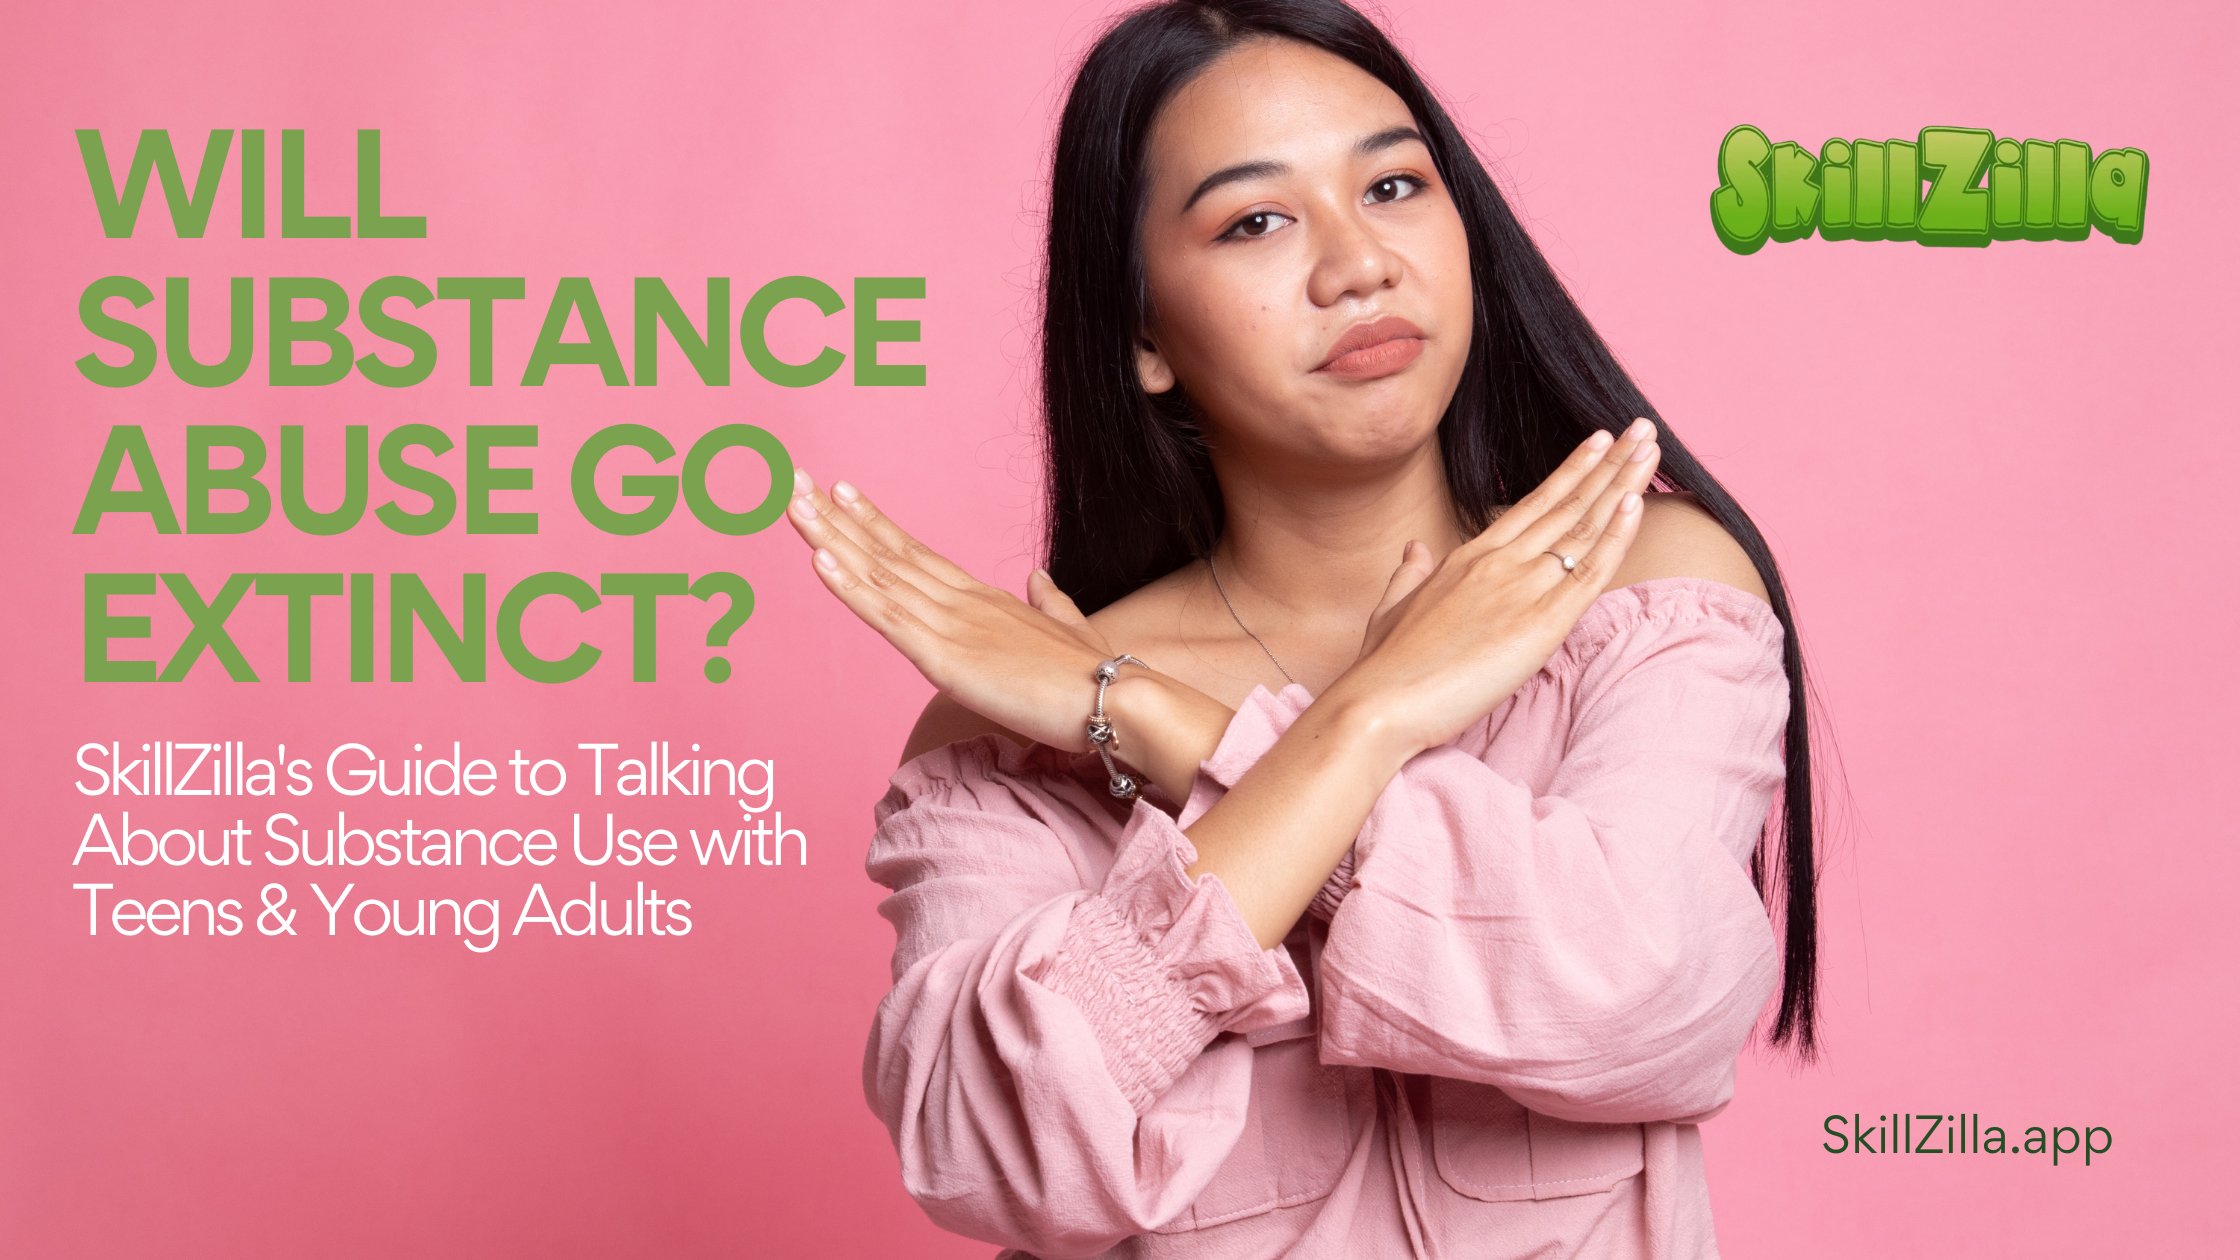 Image of a young woman with arms crossed in front of her in an X and text that reads Will Substance Abuse Go Extinct? SkillZilla's Guide to Talking About Substance Use with Teens and Young Adults